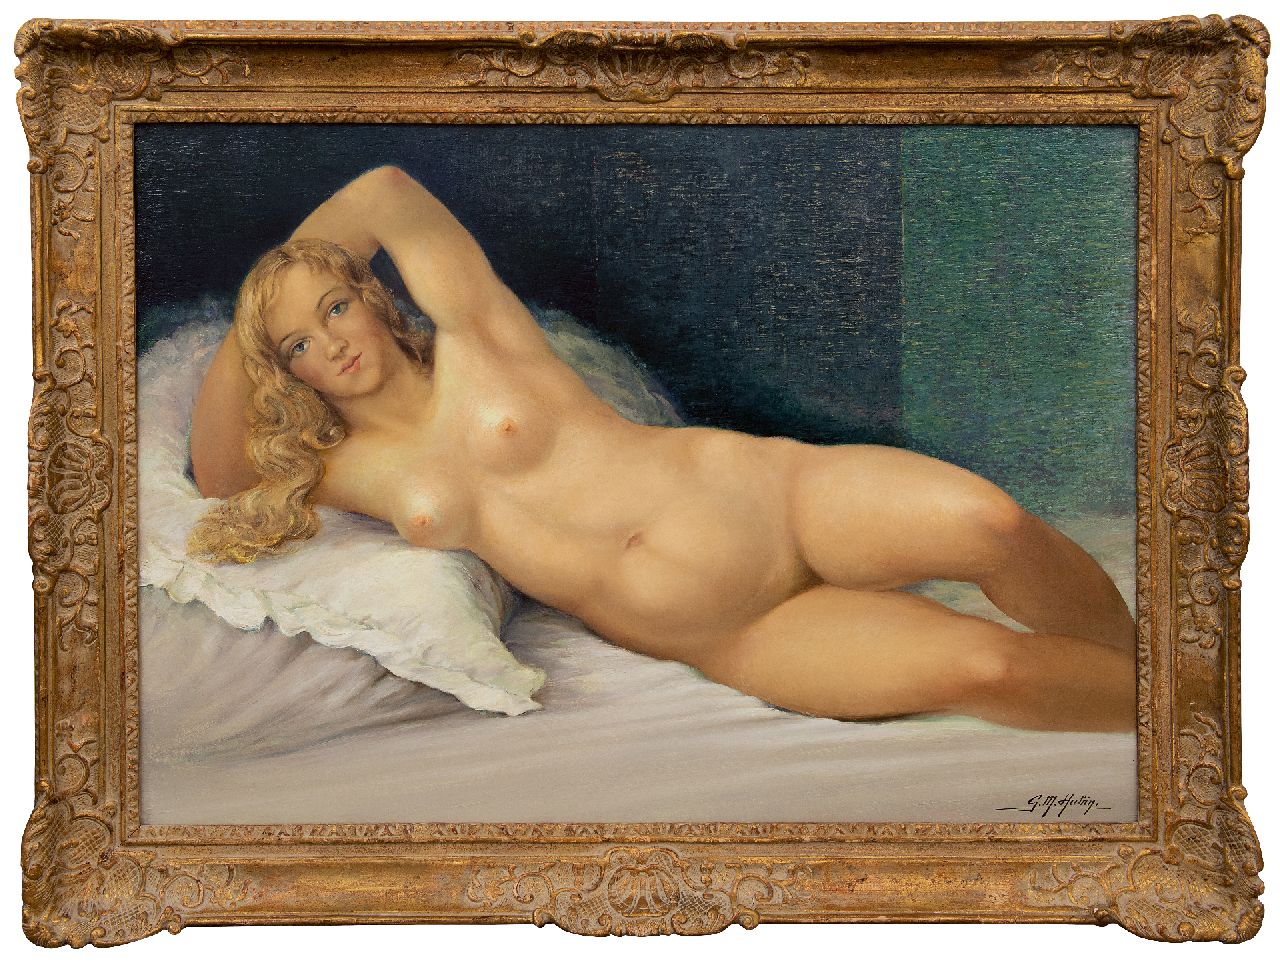 Hubin G.M.  | Gilbert Maurice Hubin | Paintings offered for sale | Reclining nude, oil on canvas 74.0 x 102.2 cm, signed l.r.